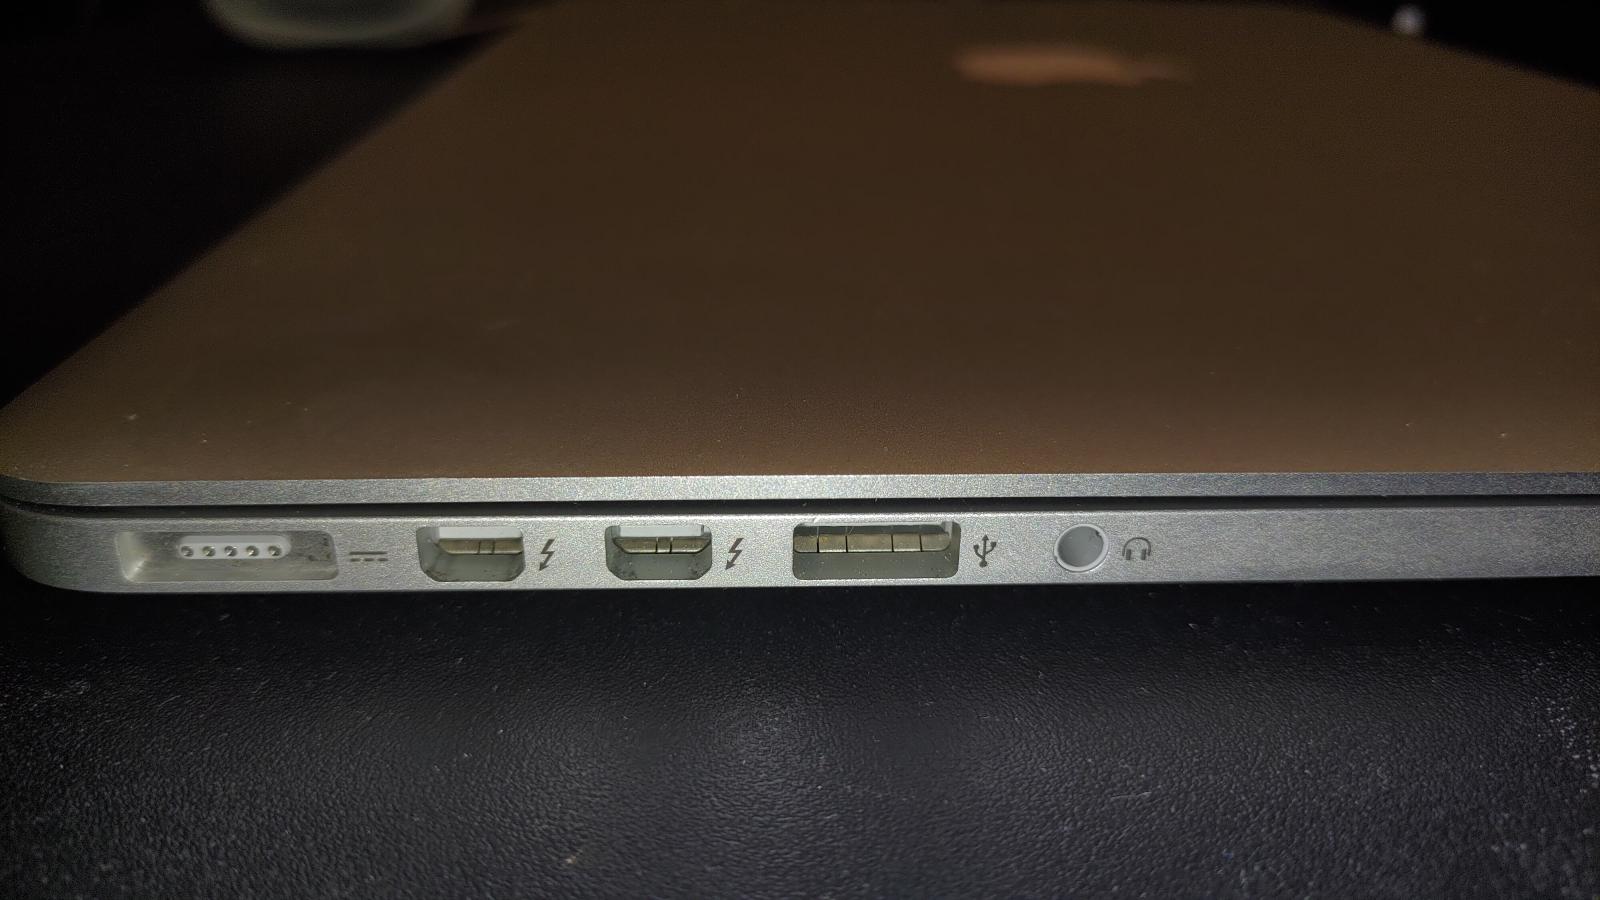 For sale MacBook Pro 15-Inch 